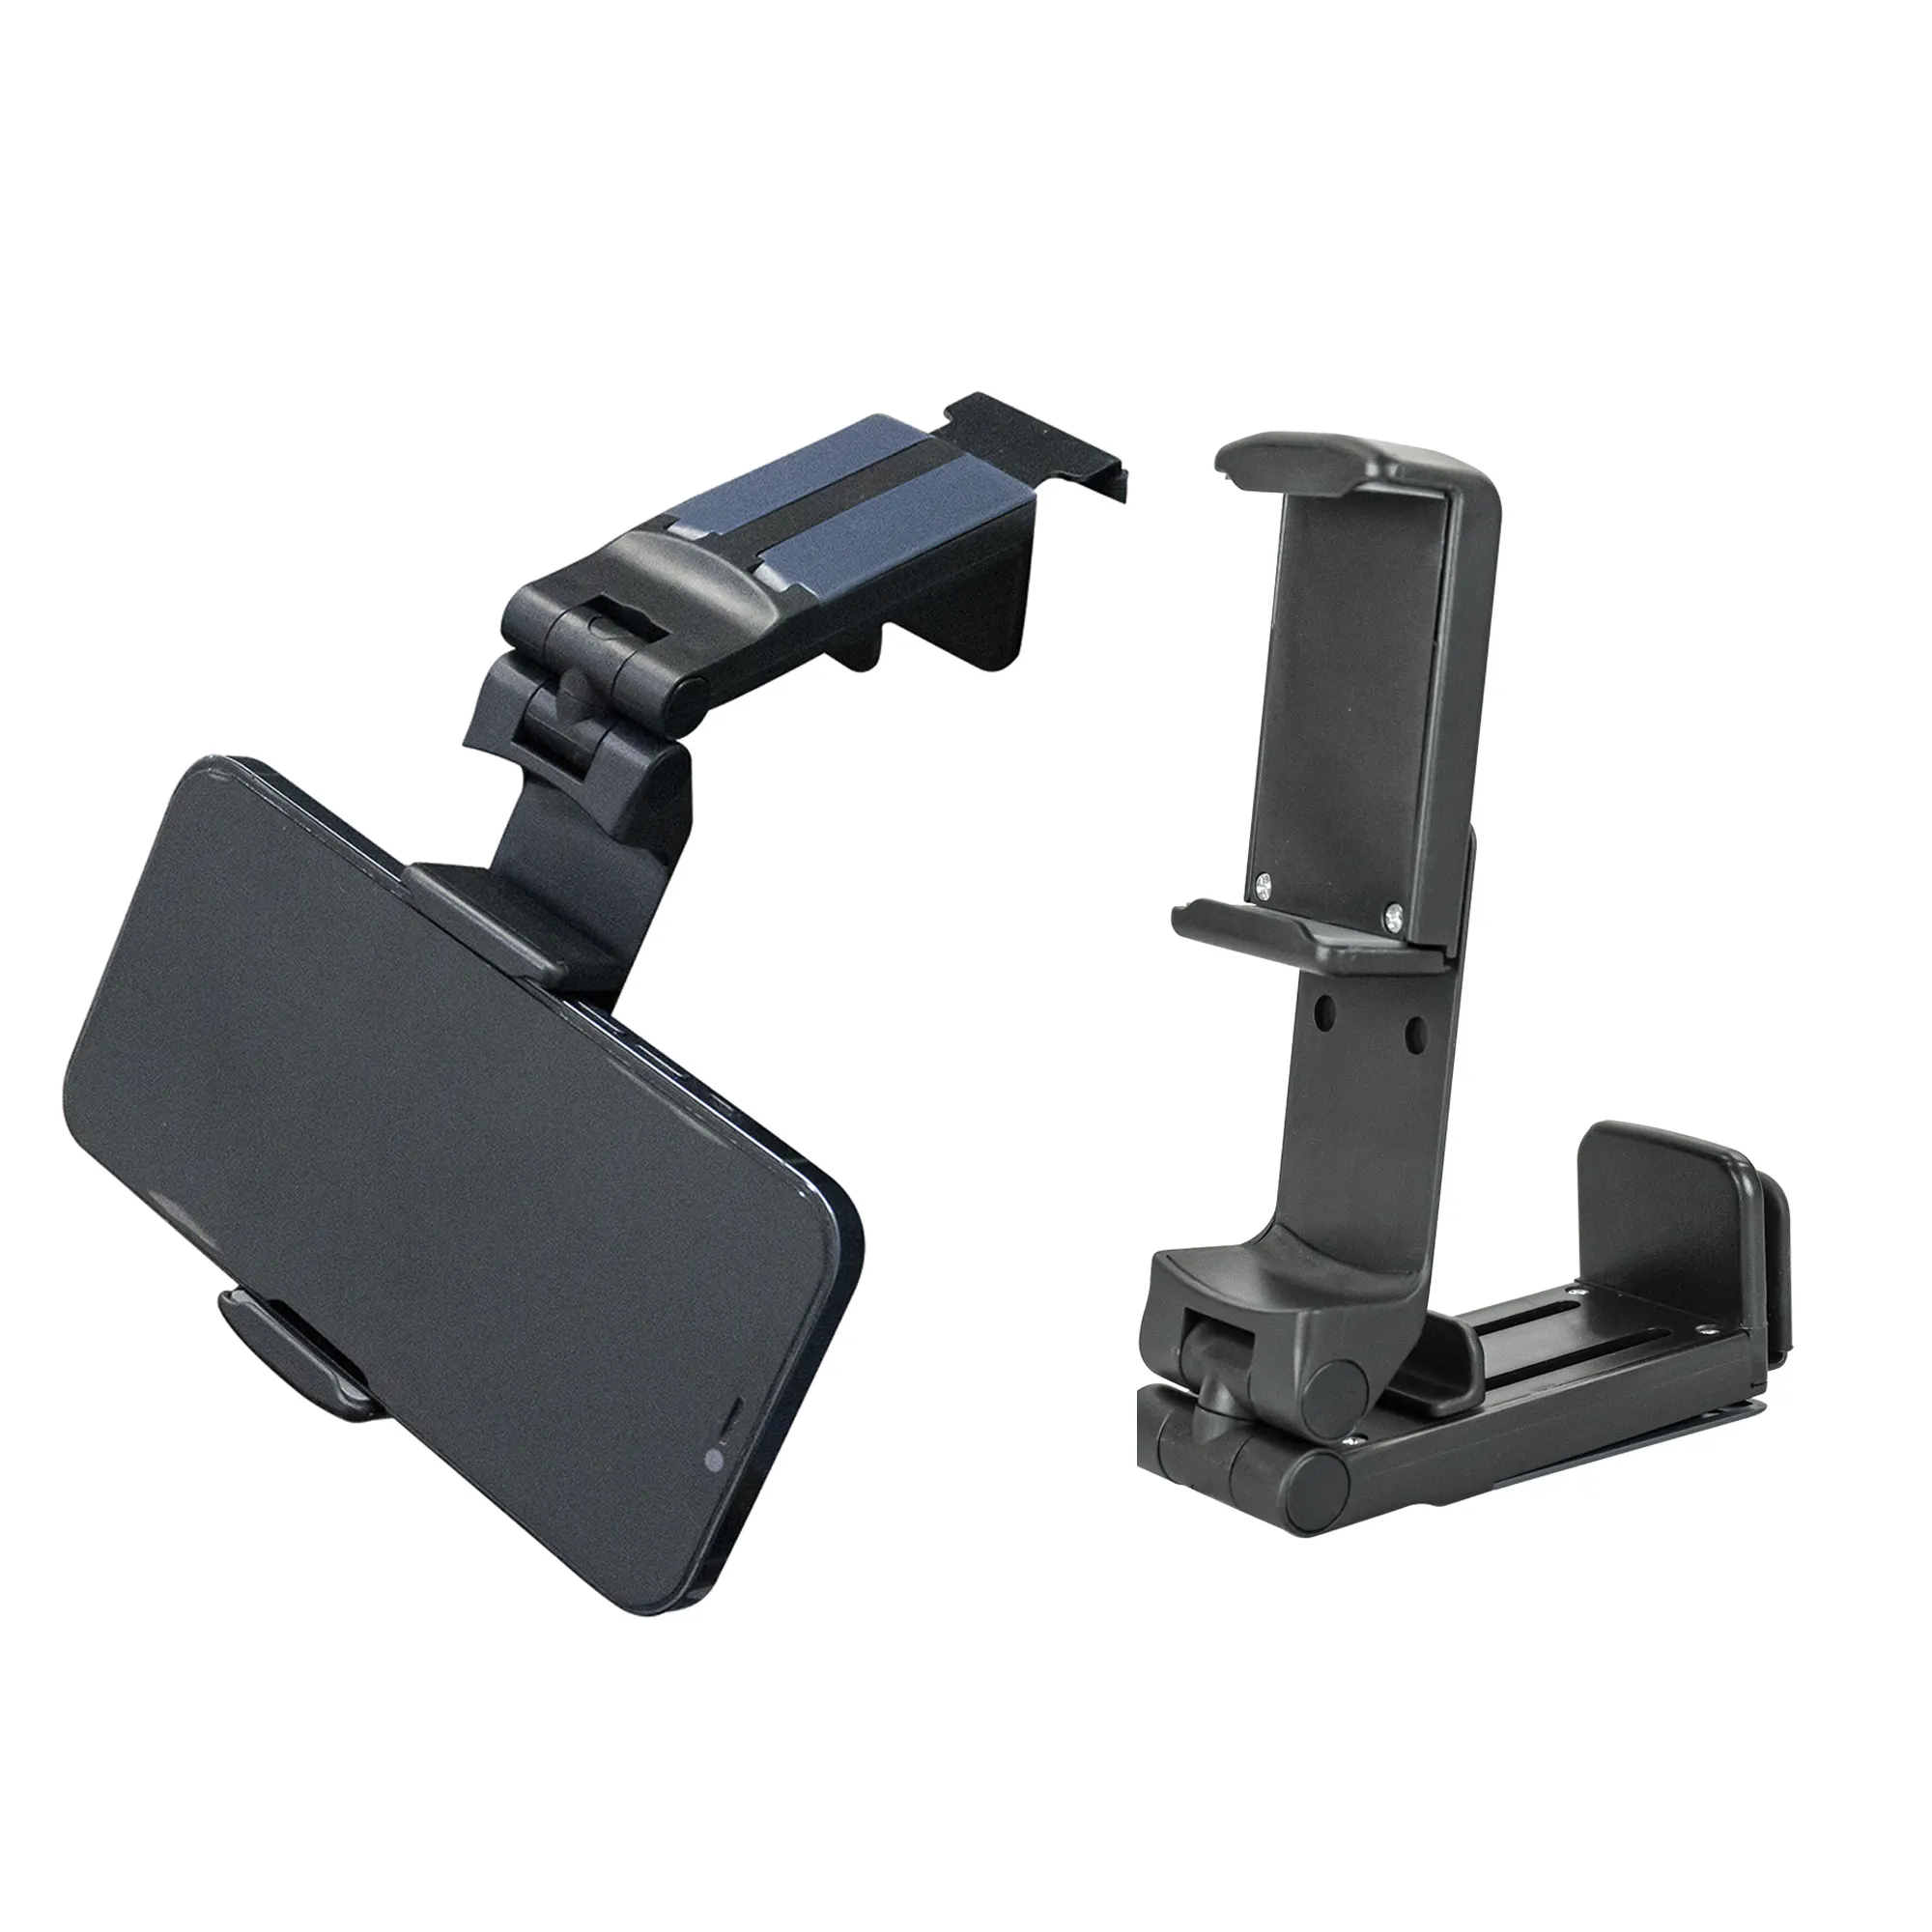 Wholesale Pocket Size Travel Essential Accessory Handsfree Phone Holder Universal Airplane in Flight Phone Mount